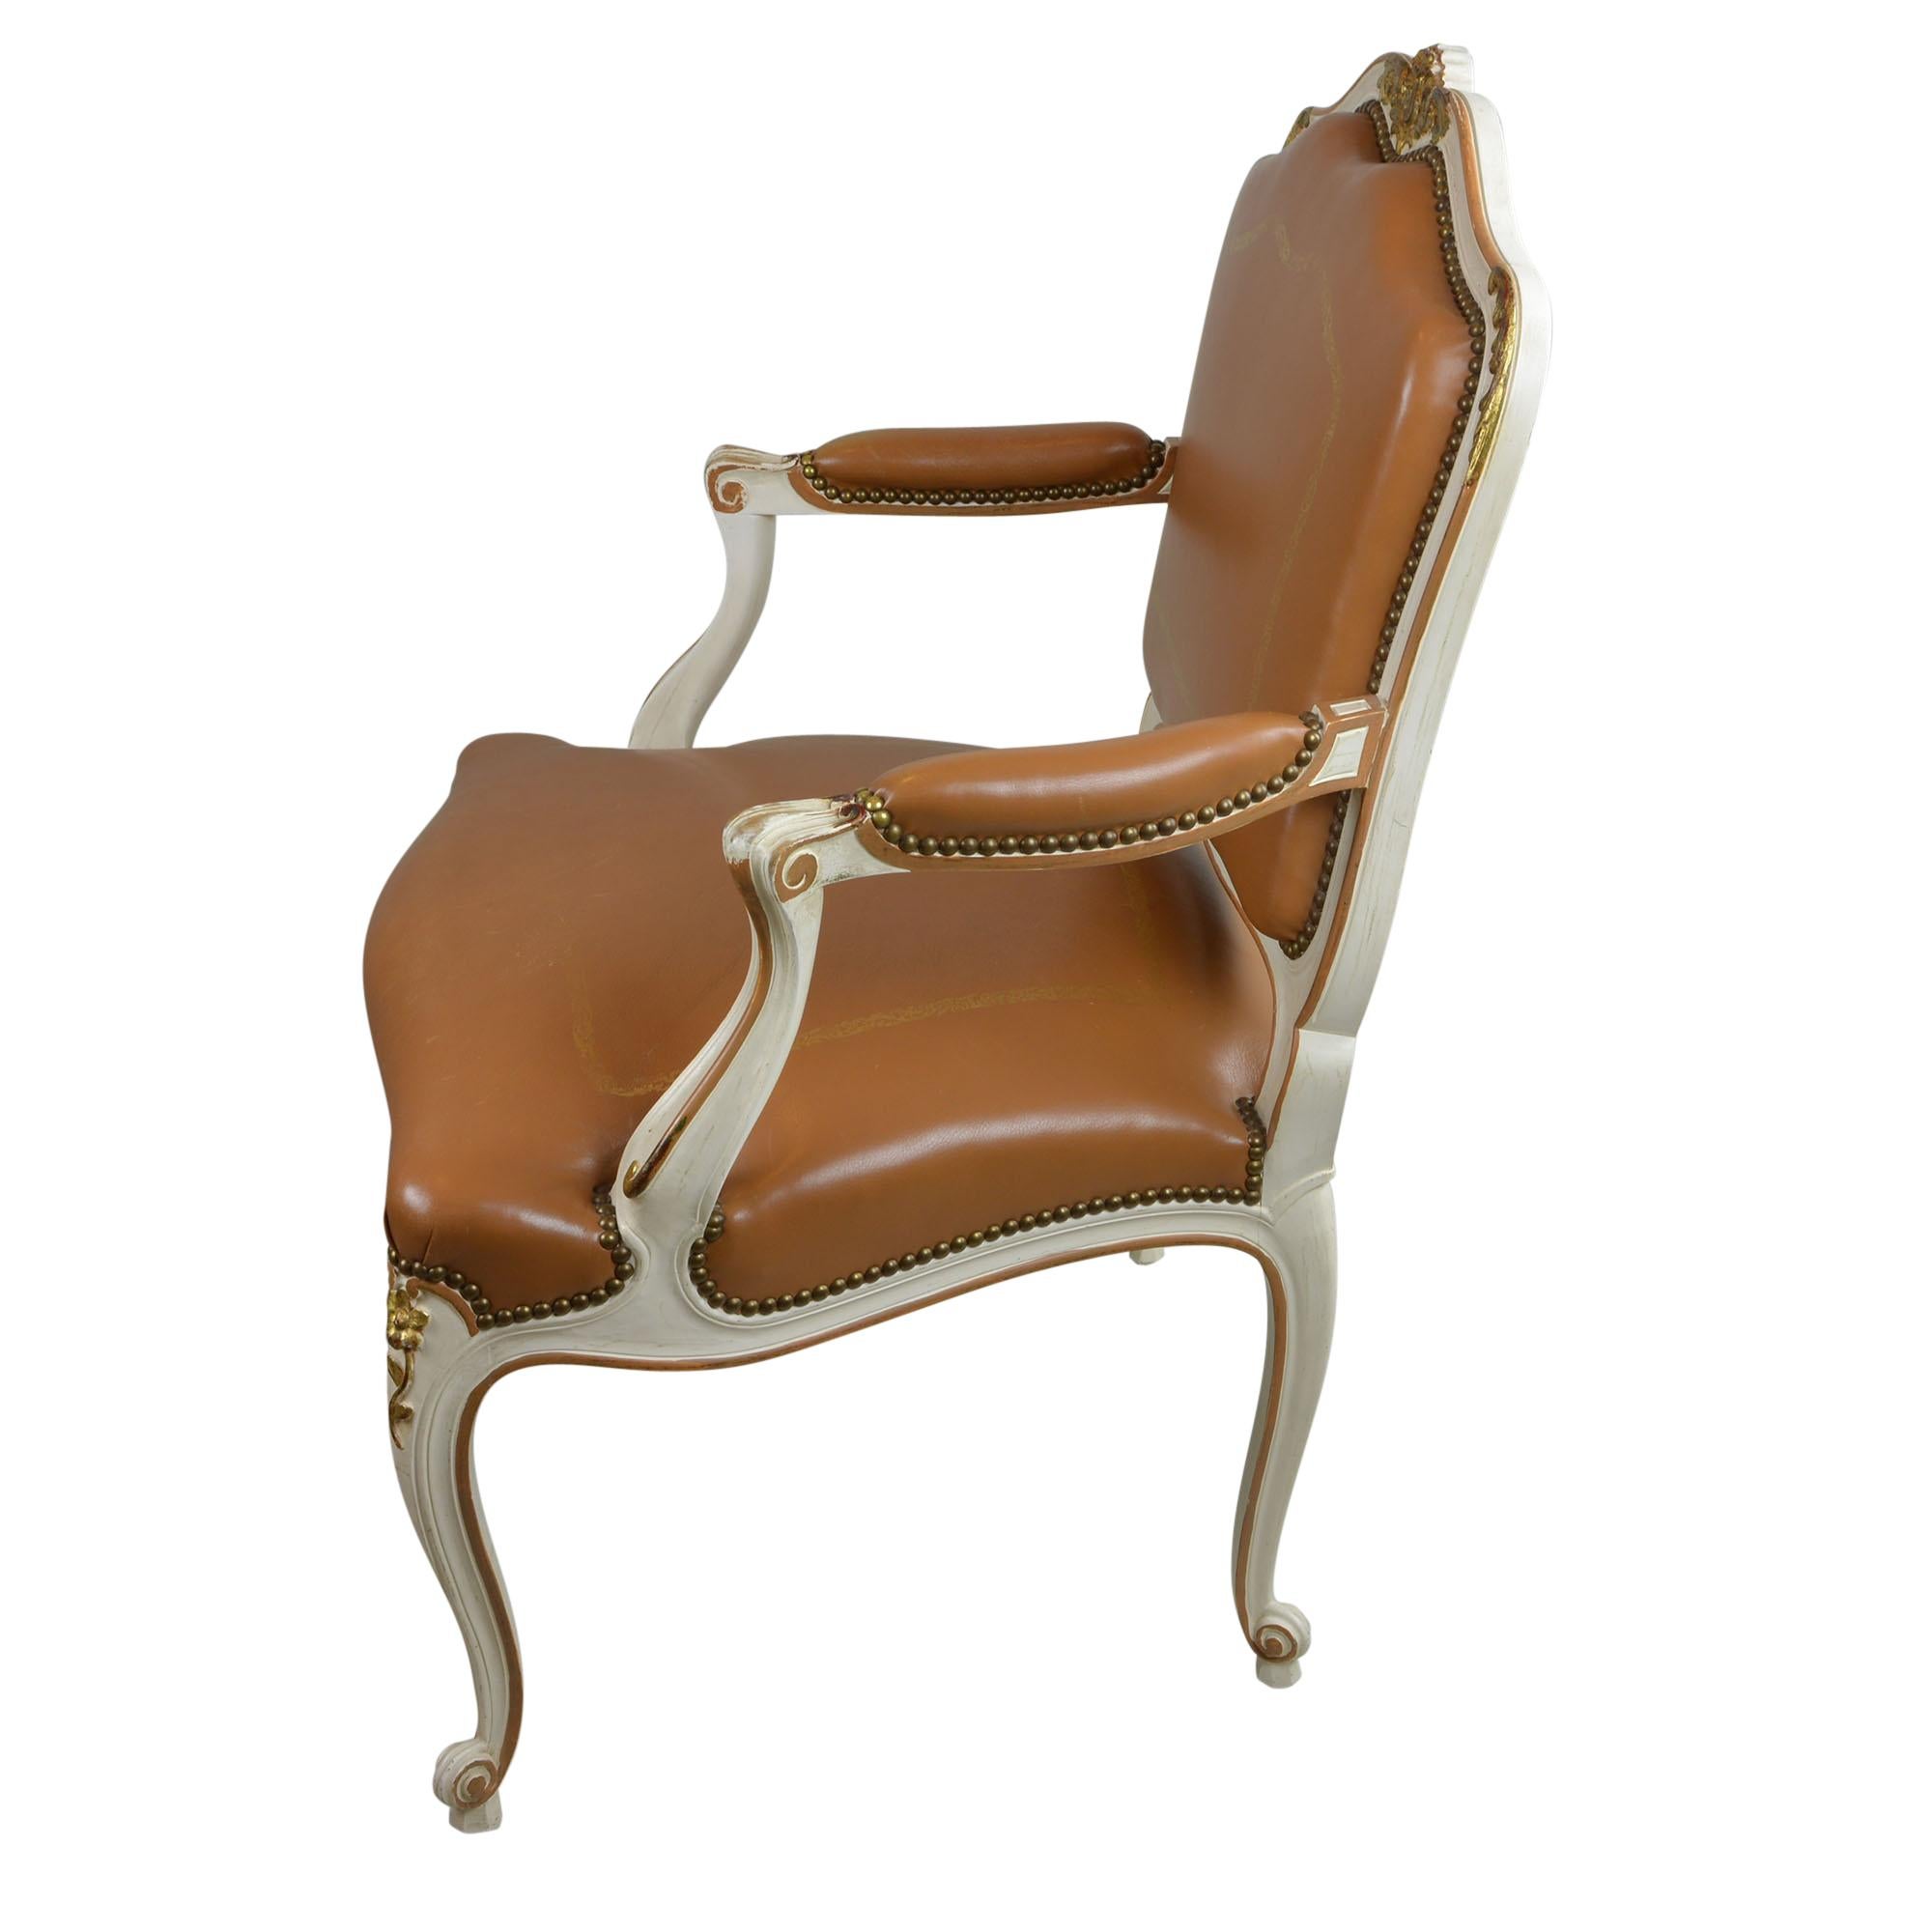 Lovely Louis XV style chair is upholstered in a saddle brown antique leather that is embellished with hand tooled gilt detailing. The chair has a frame that is painted in a creamy ivory color that has patinated over time, acquiring an amazing